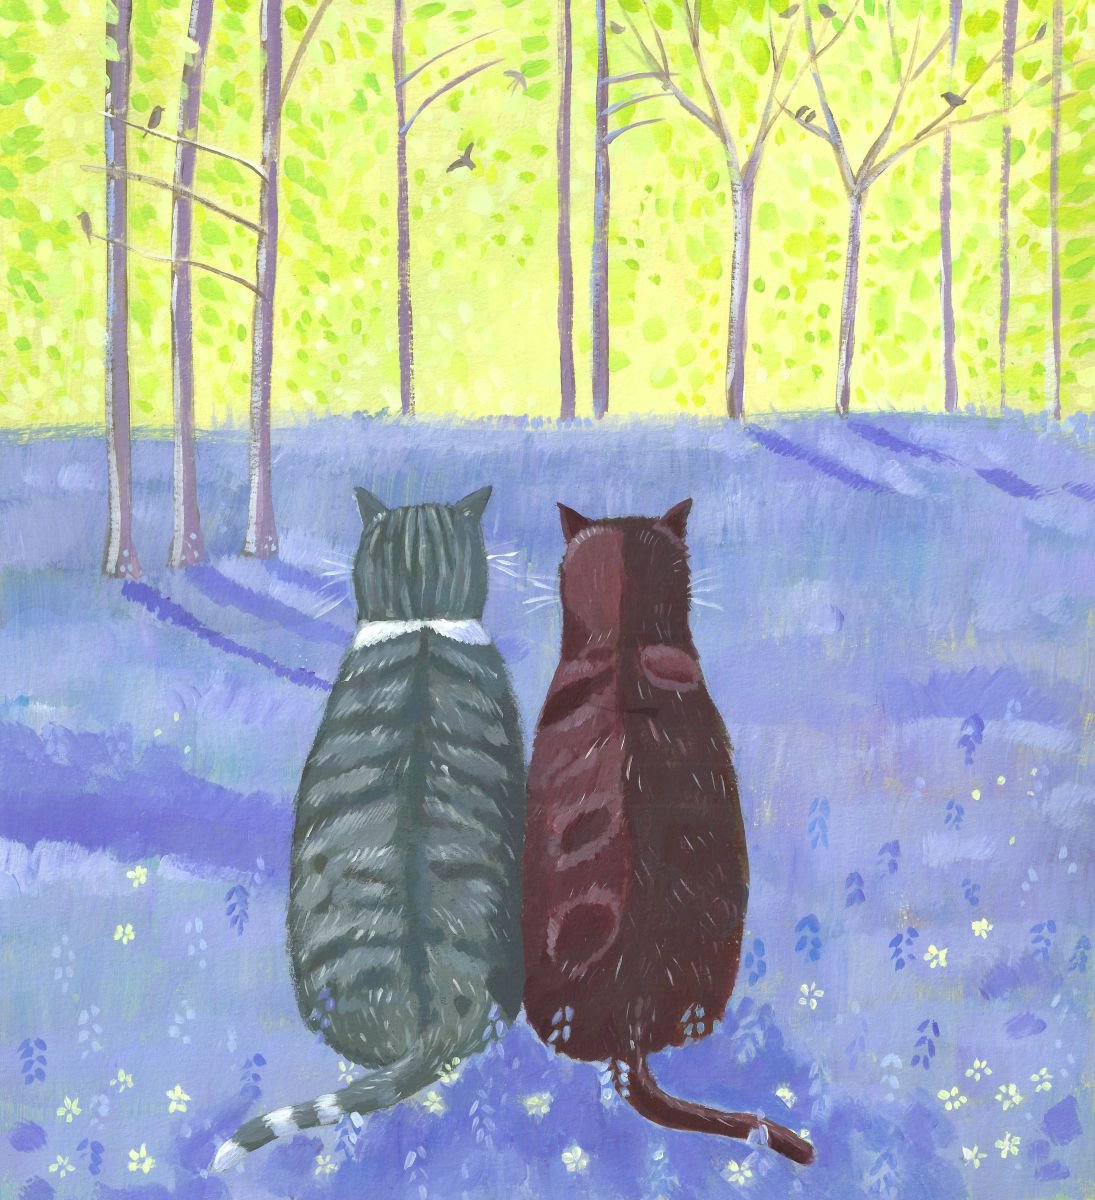 Birdwatching in the bluebells by Mary Stubberfield